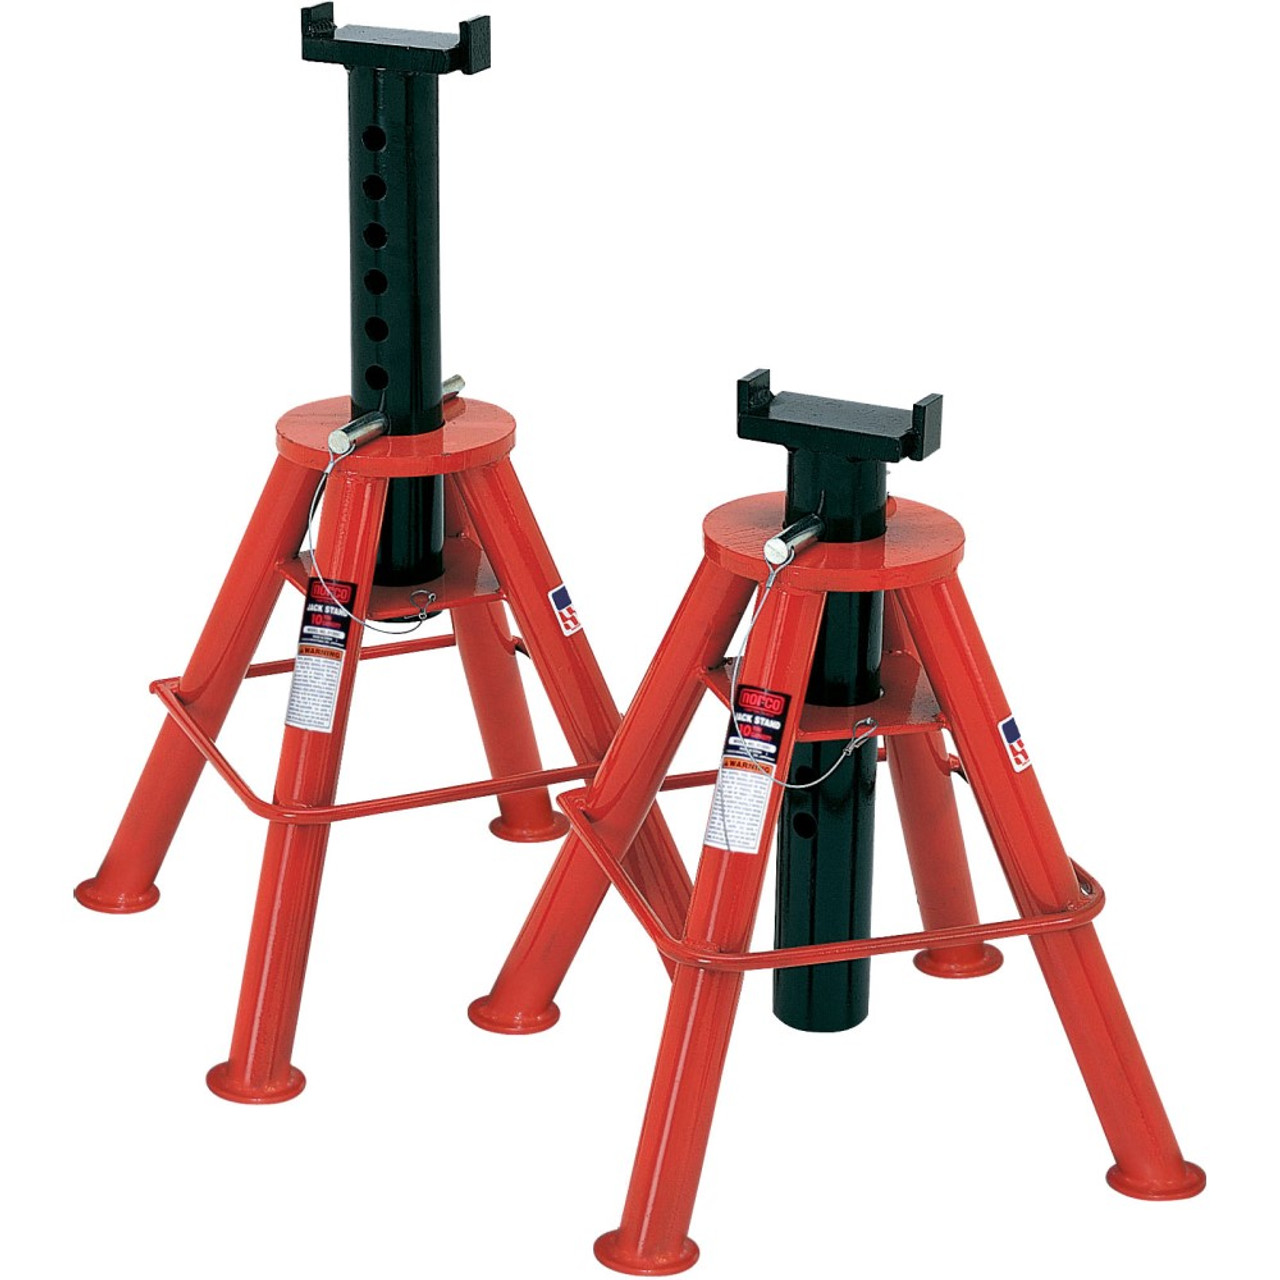 Norco 81209 : 10 Ton Medium Height Jack Stands